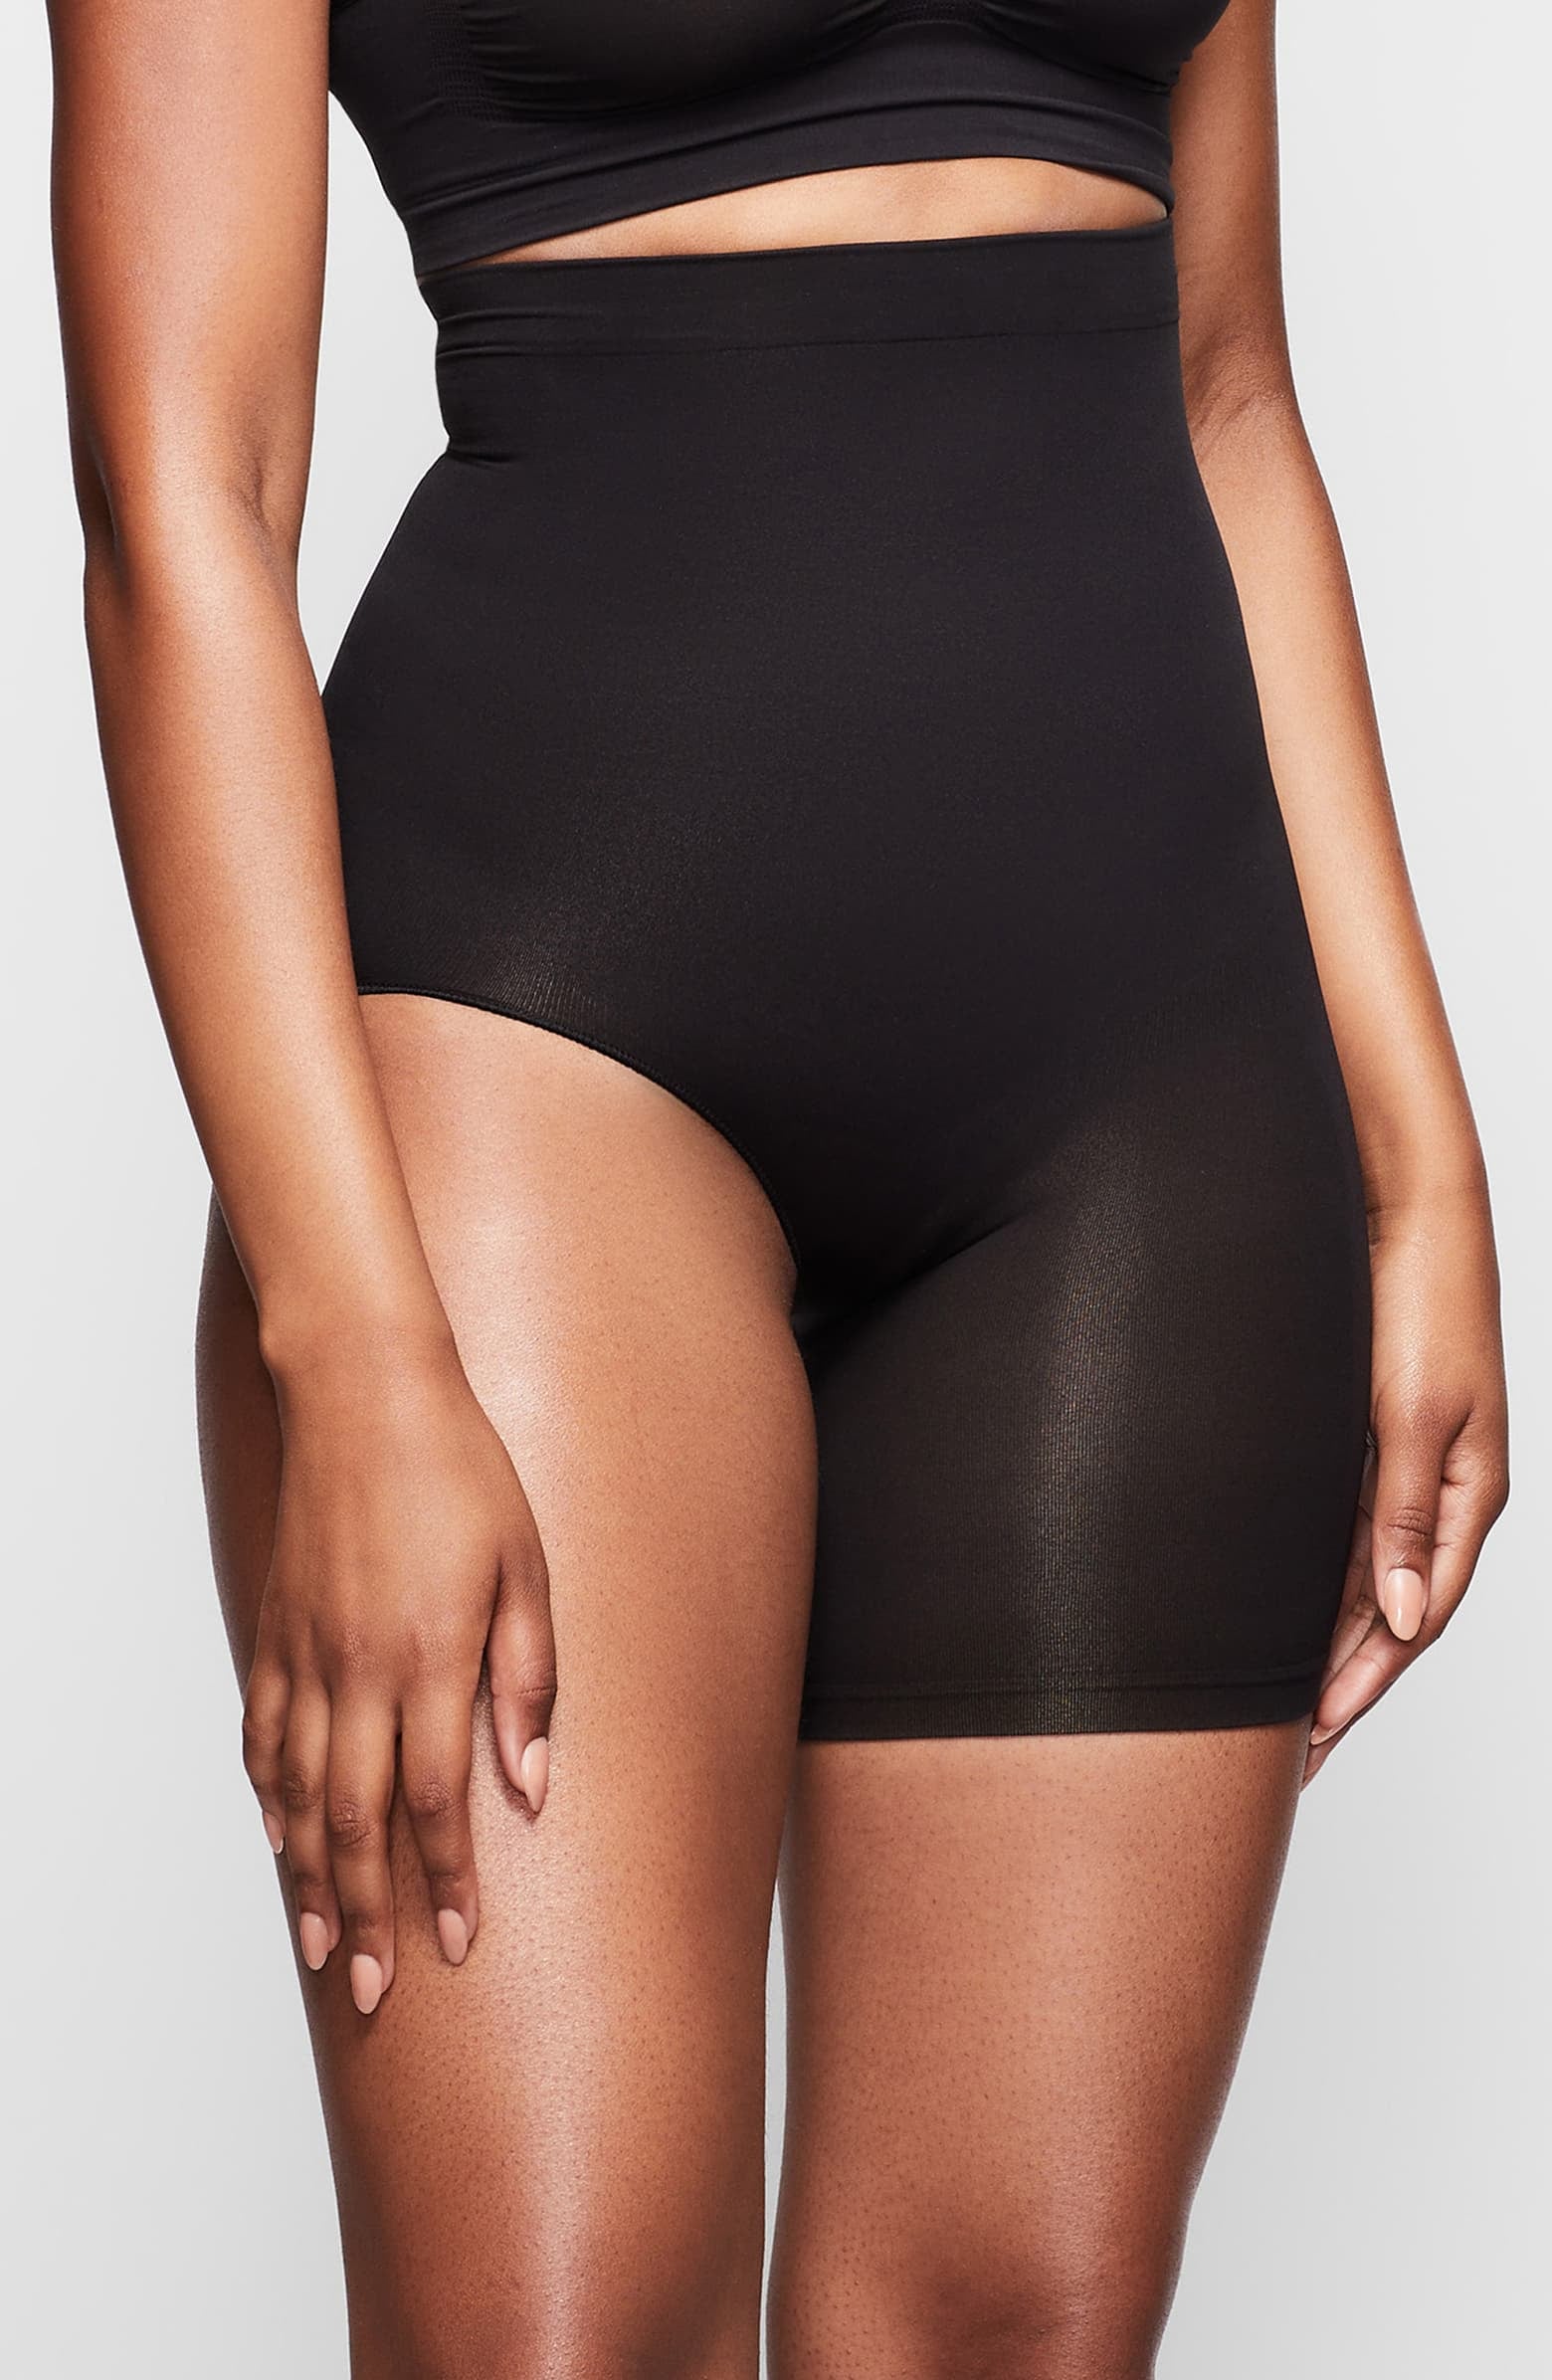 Kim Kardashian - What you've been waiting for: the @SKIMS pieces that  revolutionized the shapewear industry are back and now available to shop in  sizes XXS - 5X and in 9 tonal